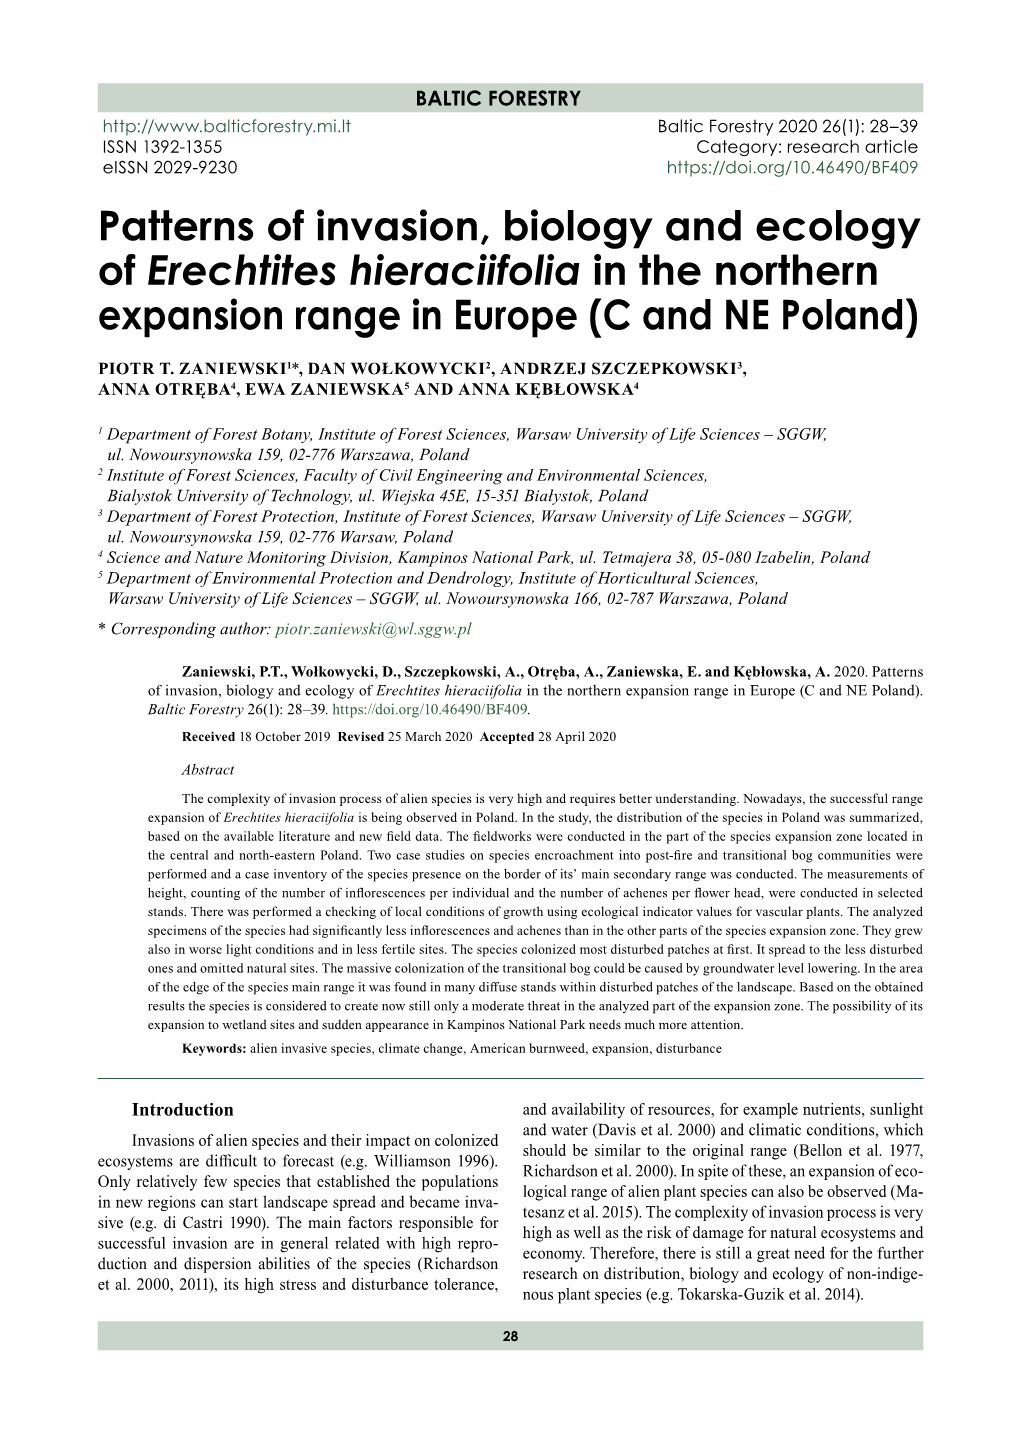 Patterns of Invasion, Biology and Ecology of Erechtites Hieraciifolia in the Northern Expansion Range in Europe (C and NE Poland)